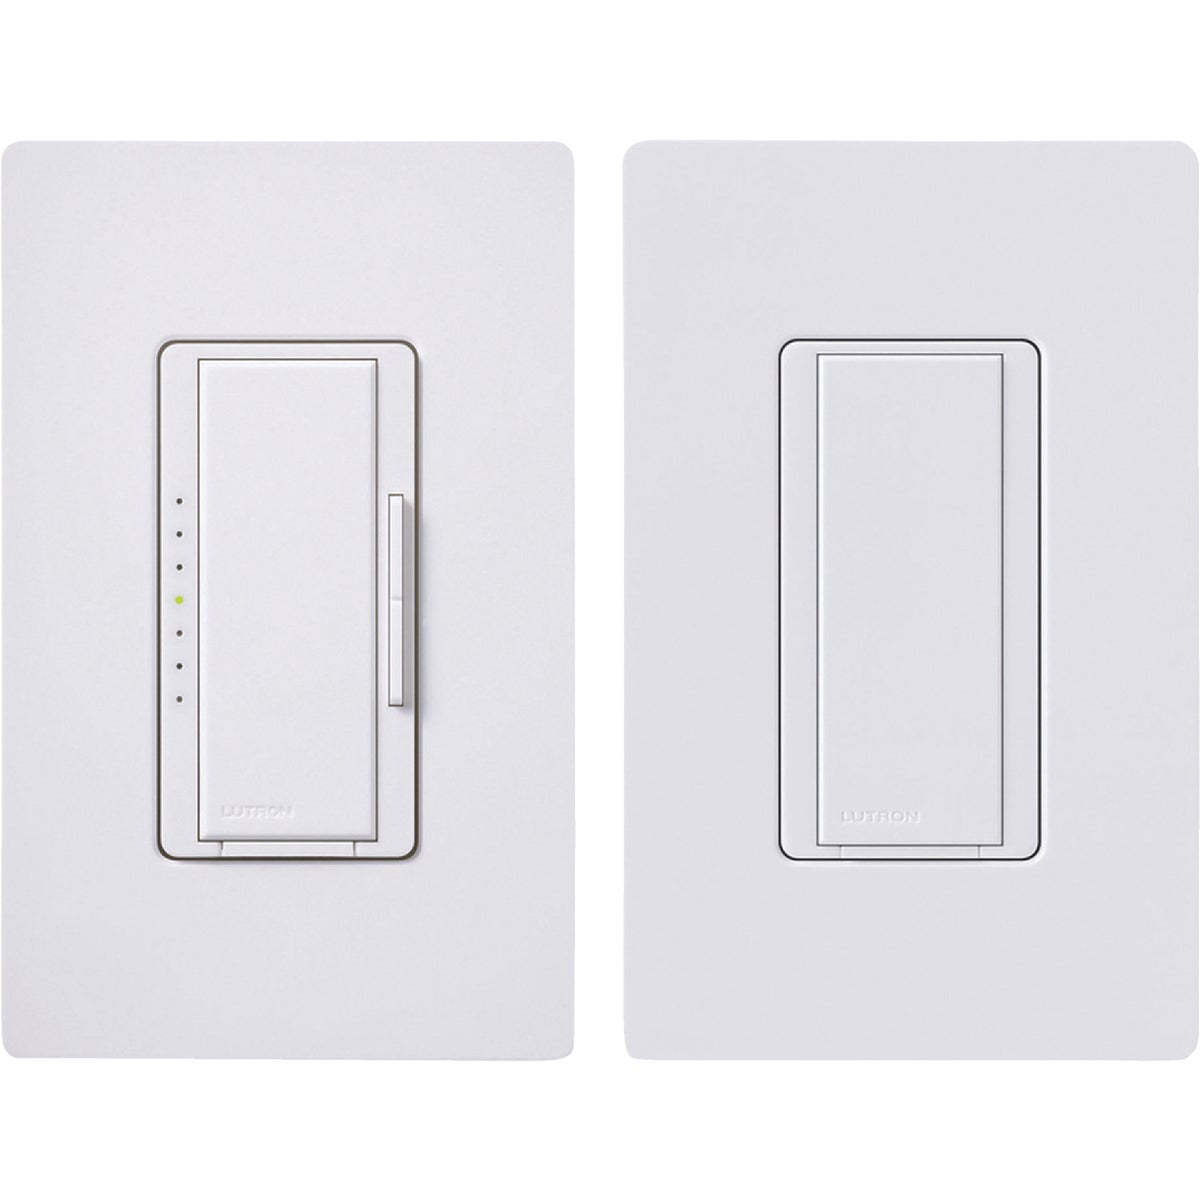 Item 500555, Dimmer which provides optimal dimming performance of LED (light emitting 